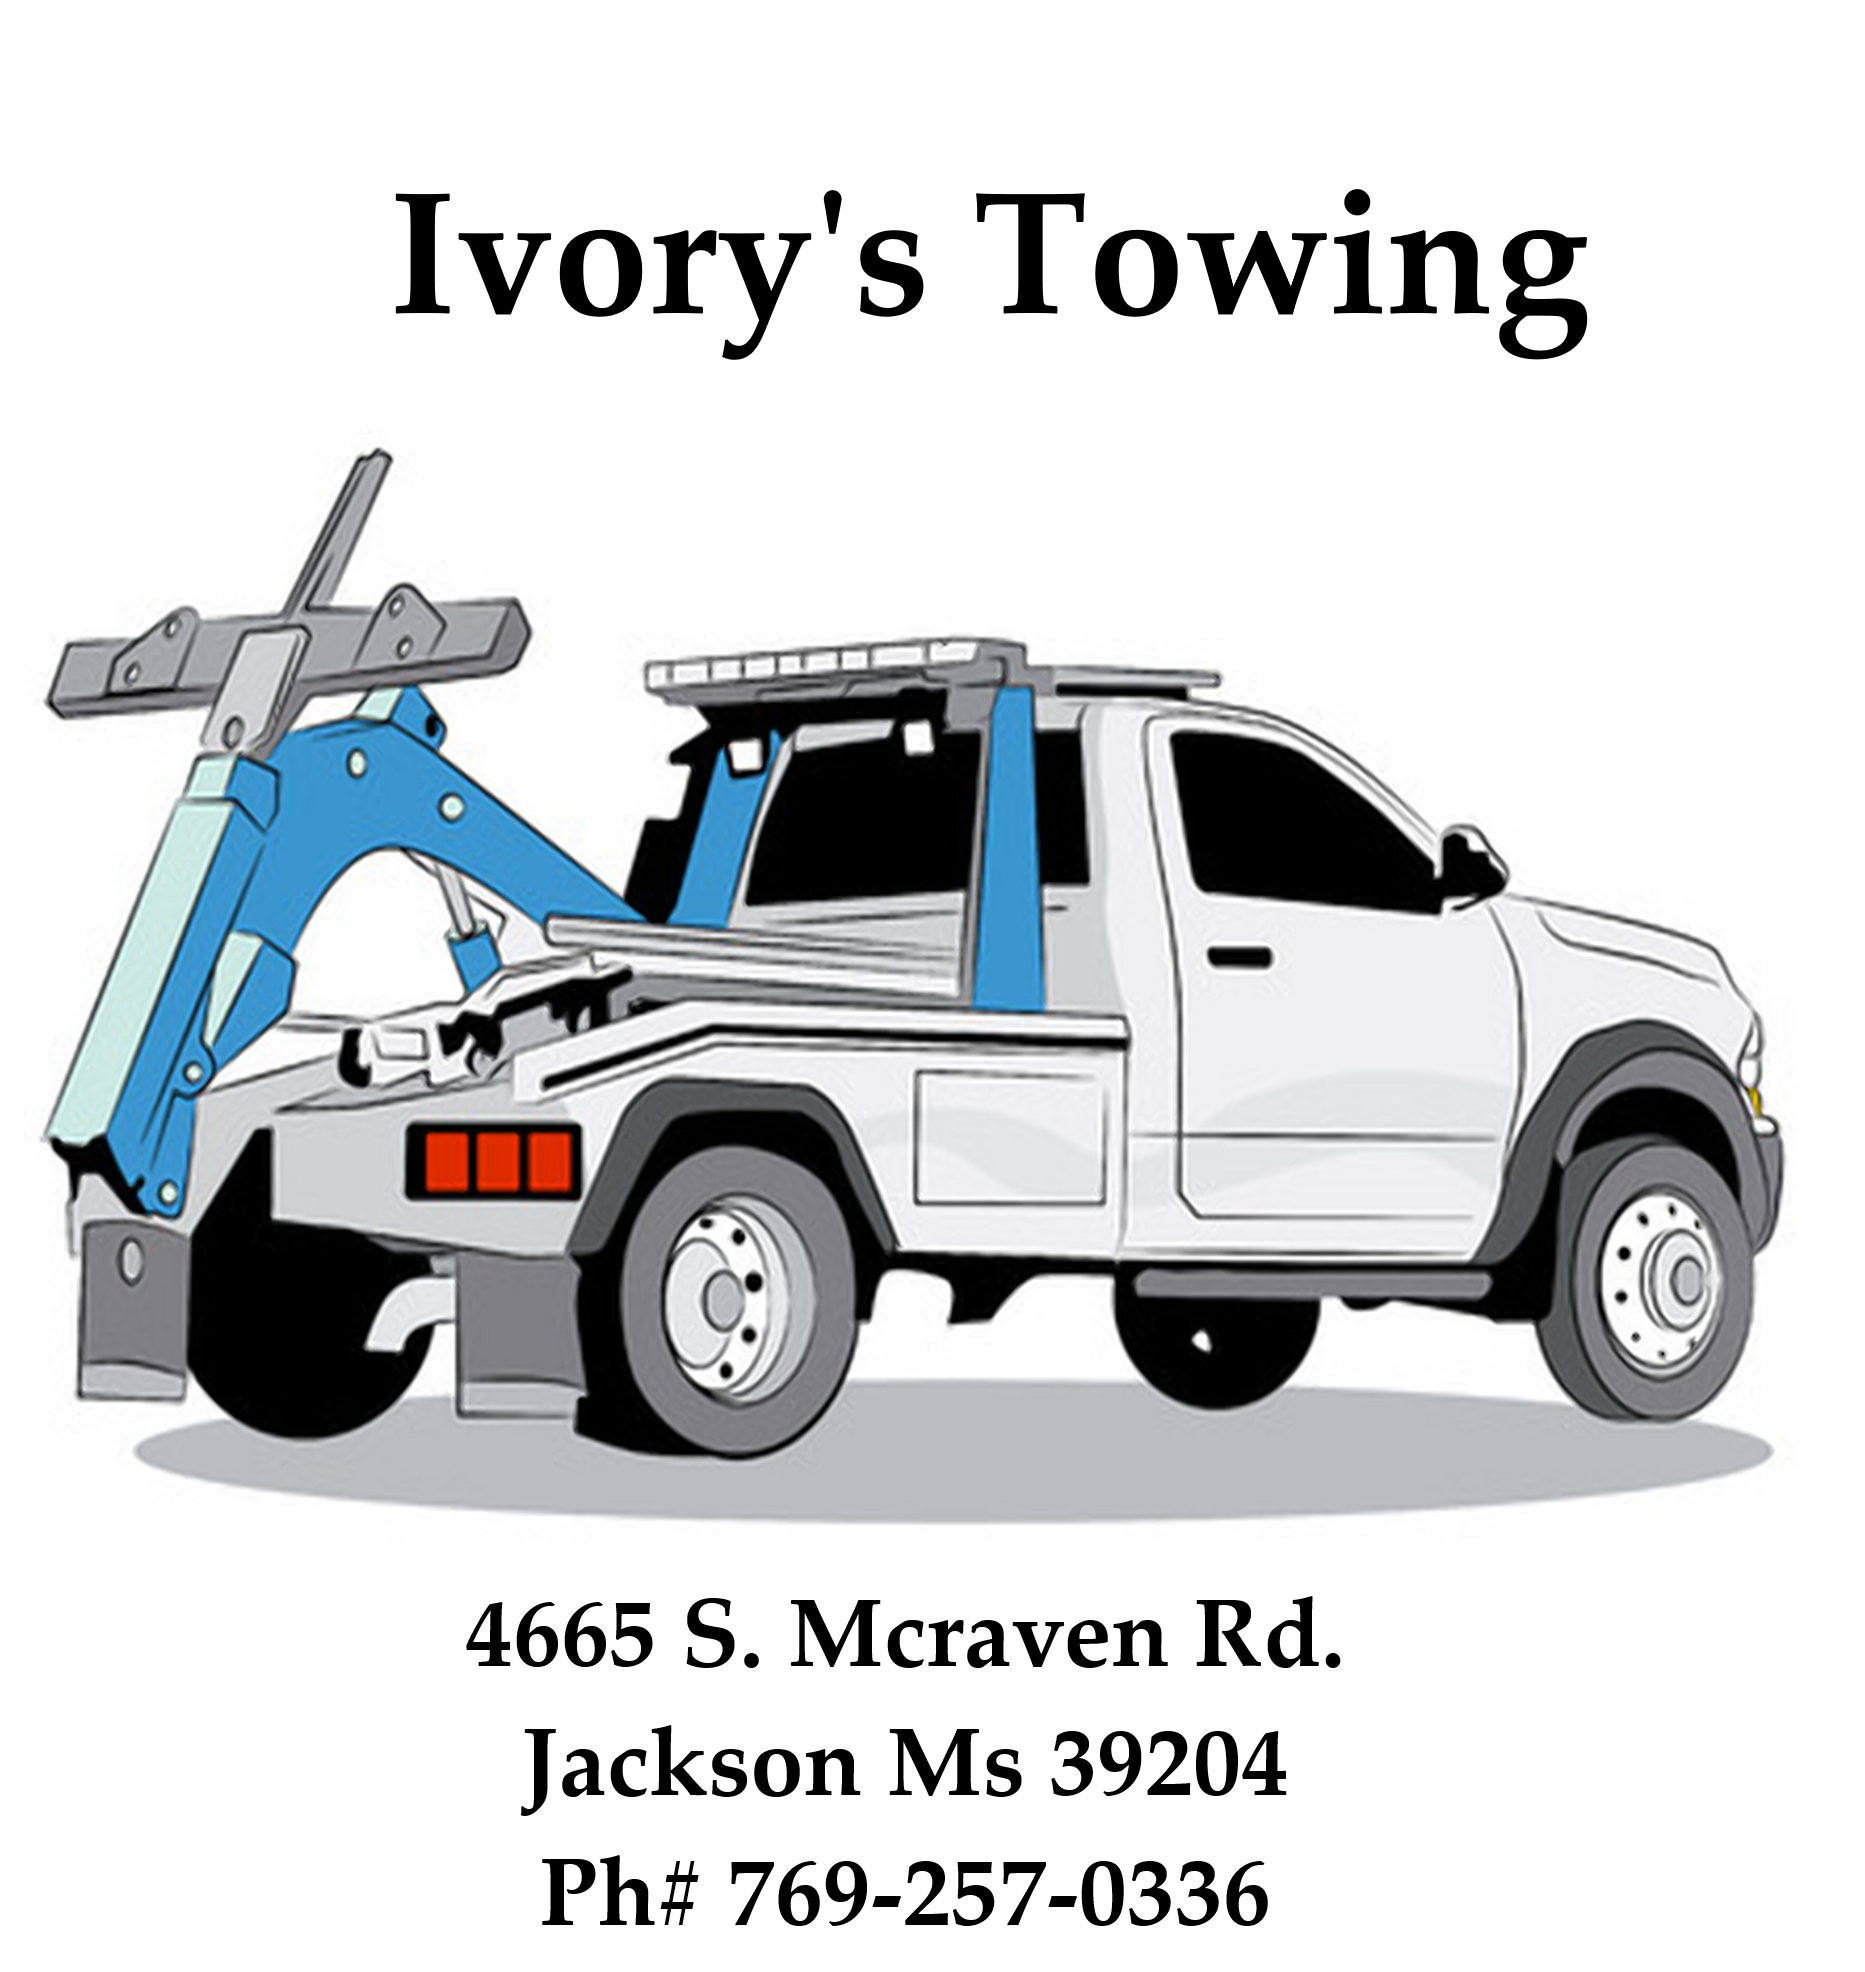 Ivory's Towing